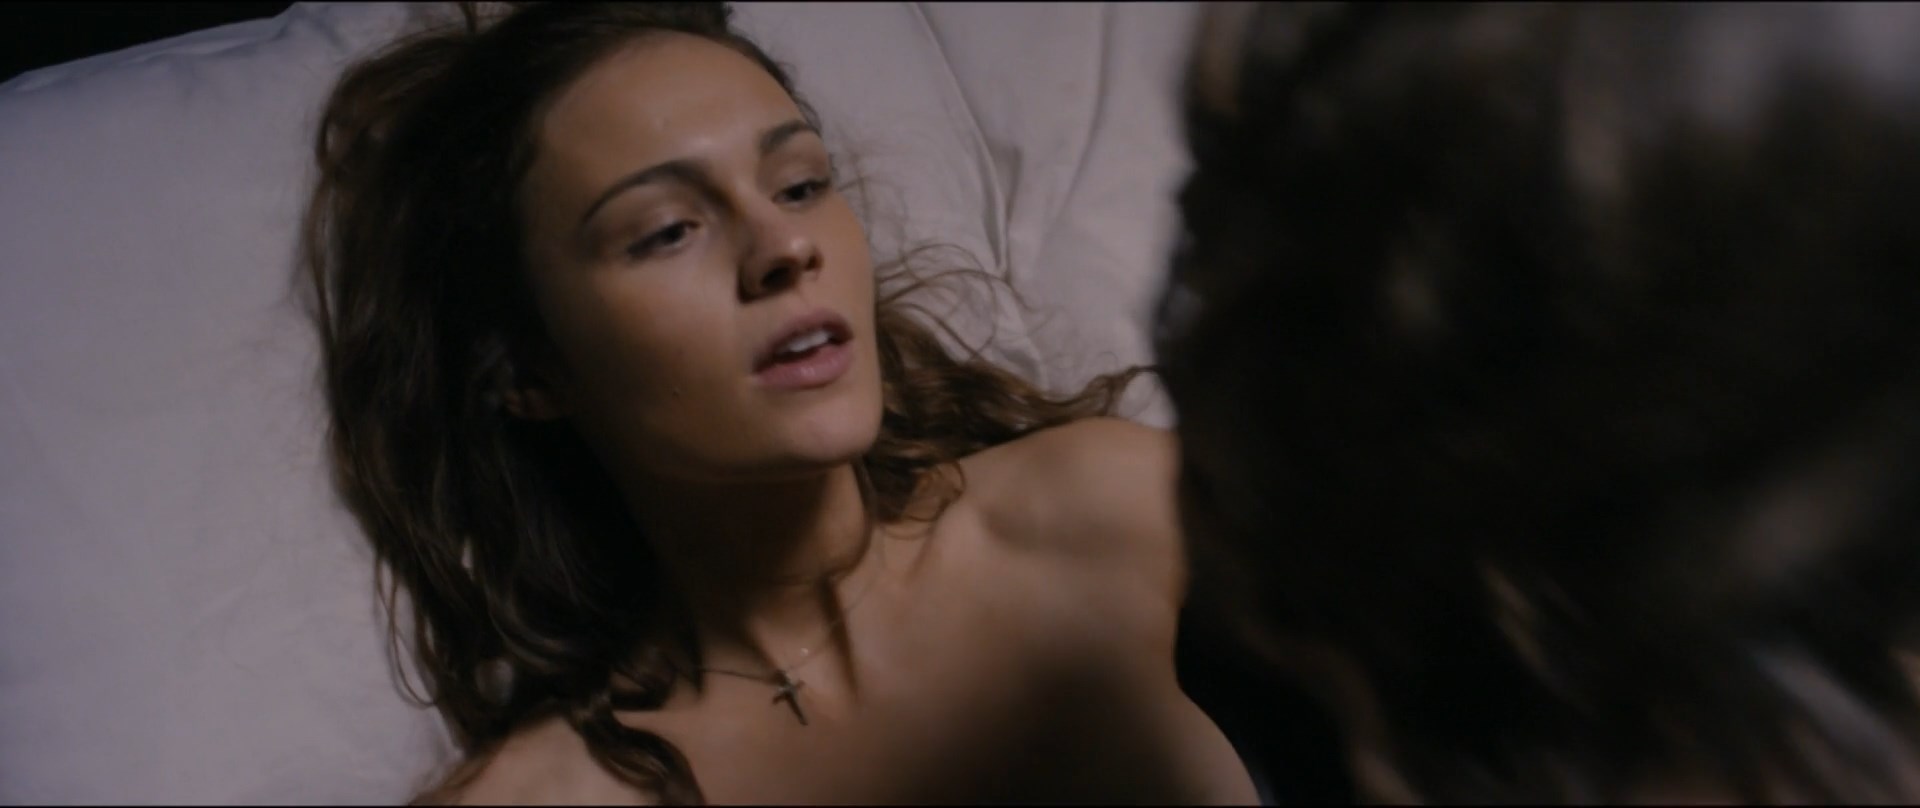 aida guerrero recommends Sophie Skelton Naked